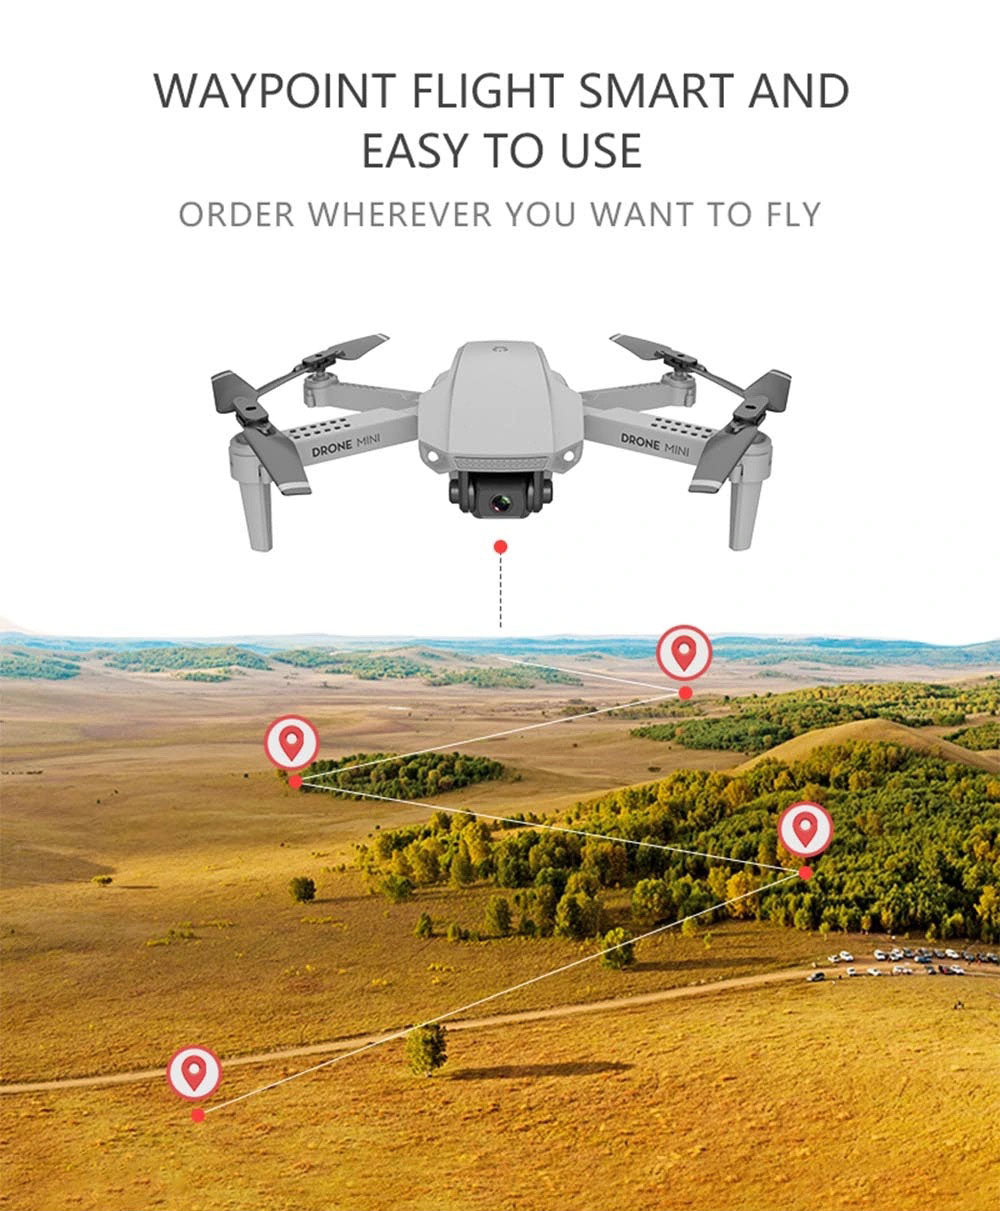 e88 drone waypoint flight smart and easy to use